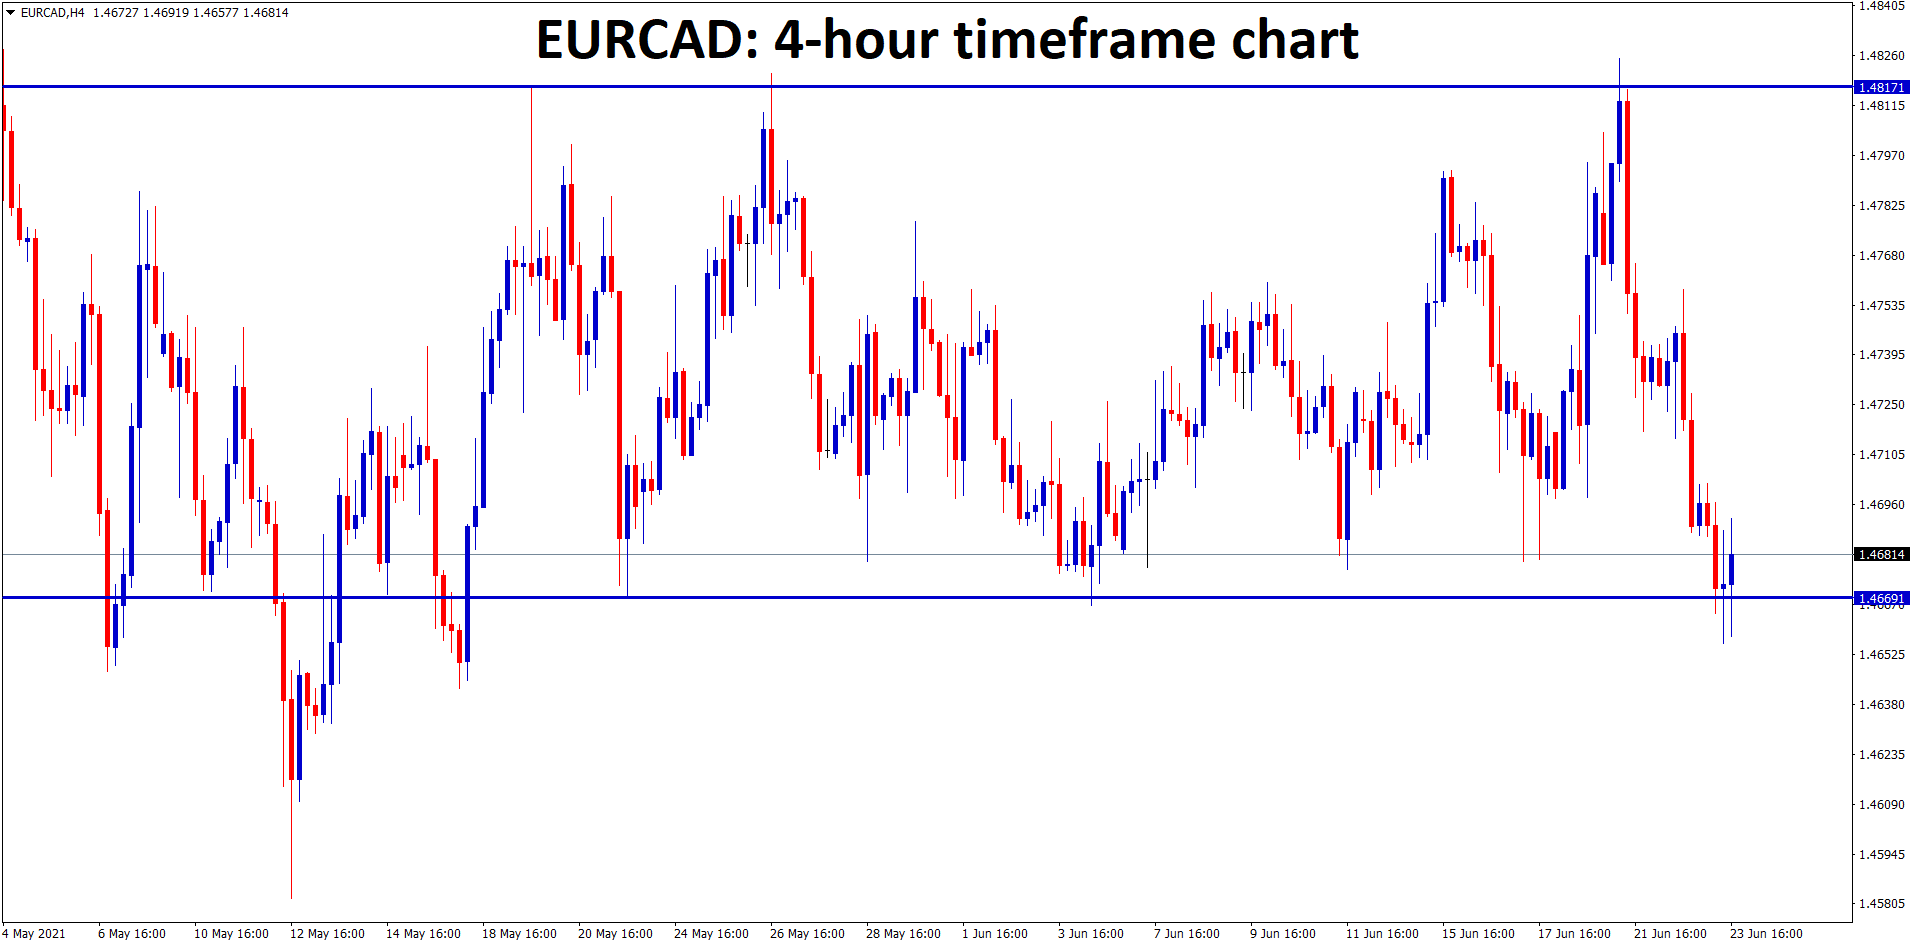 EURCAD is moving between the support and resistance levels